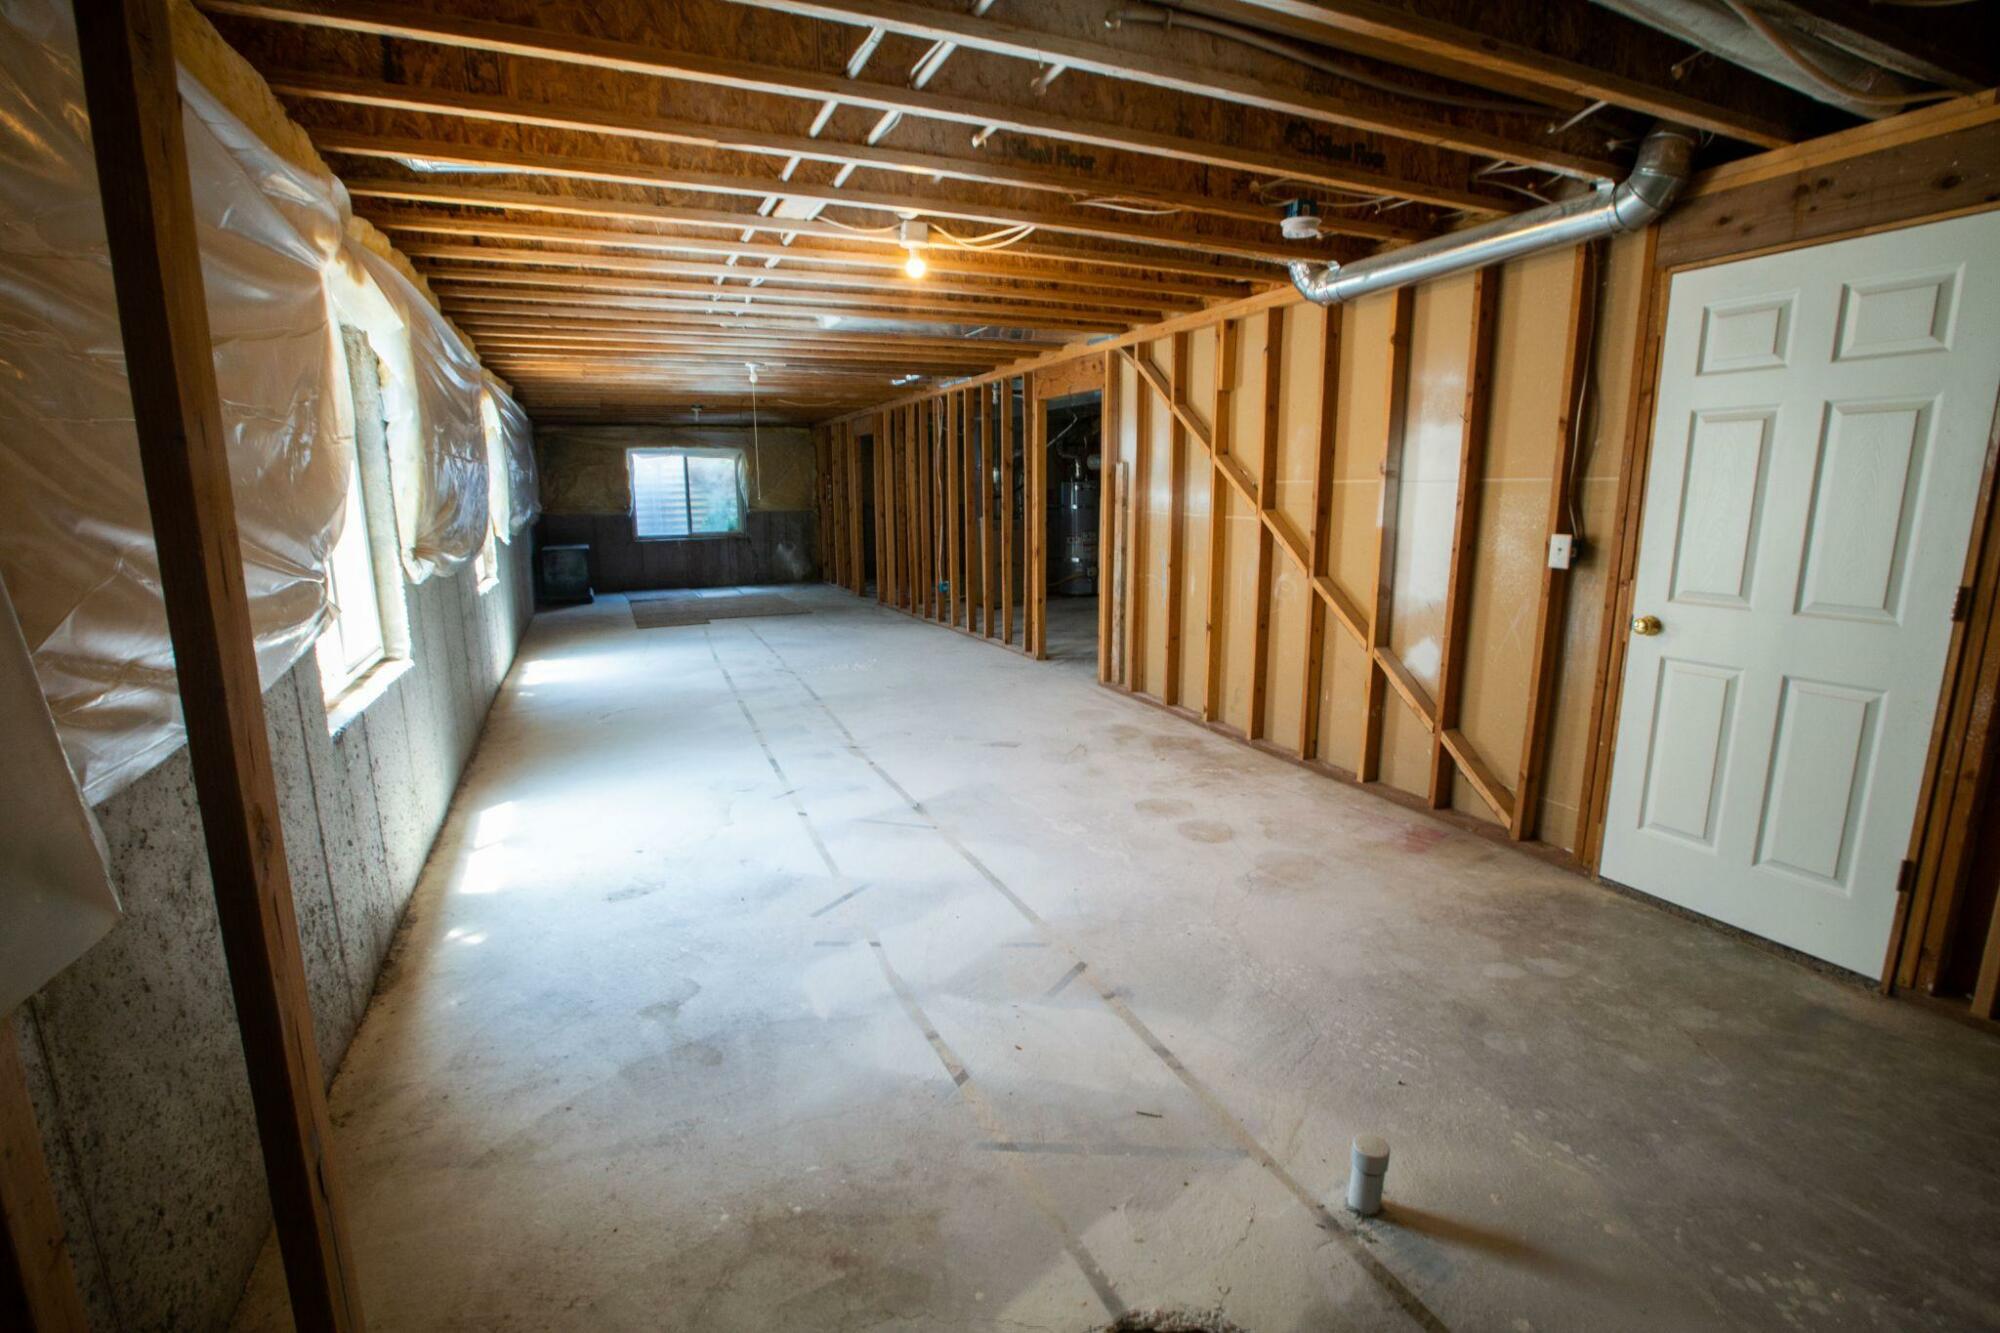 A basement being remodeled in a house.